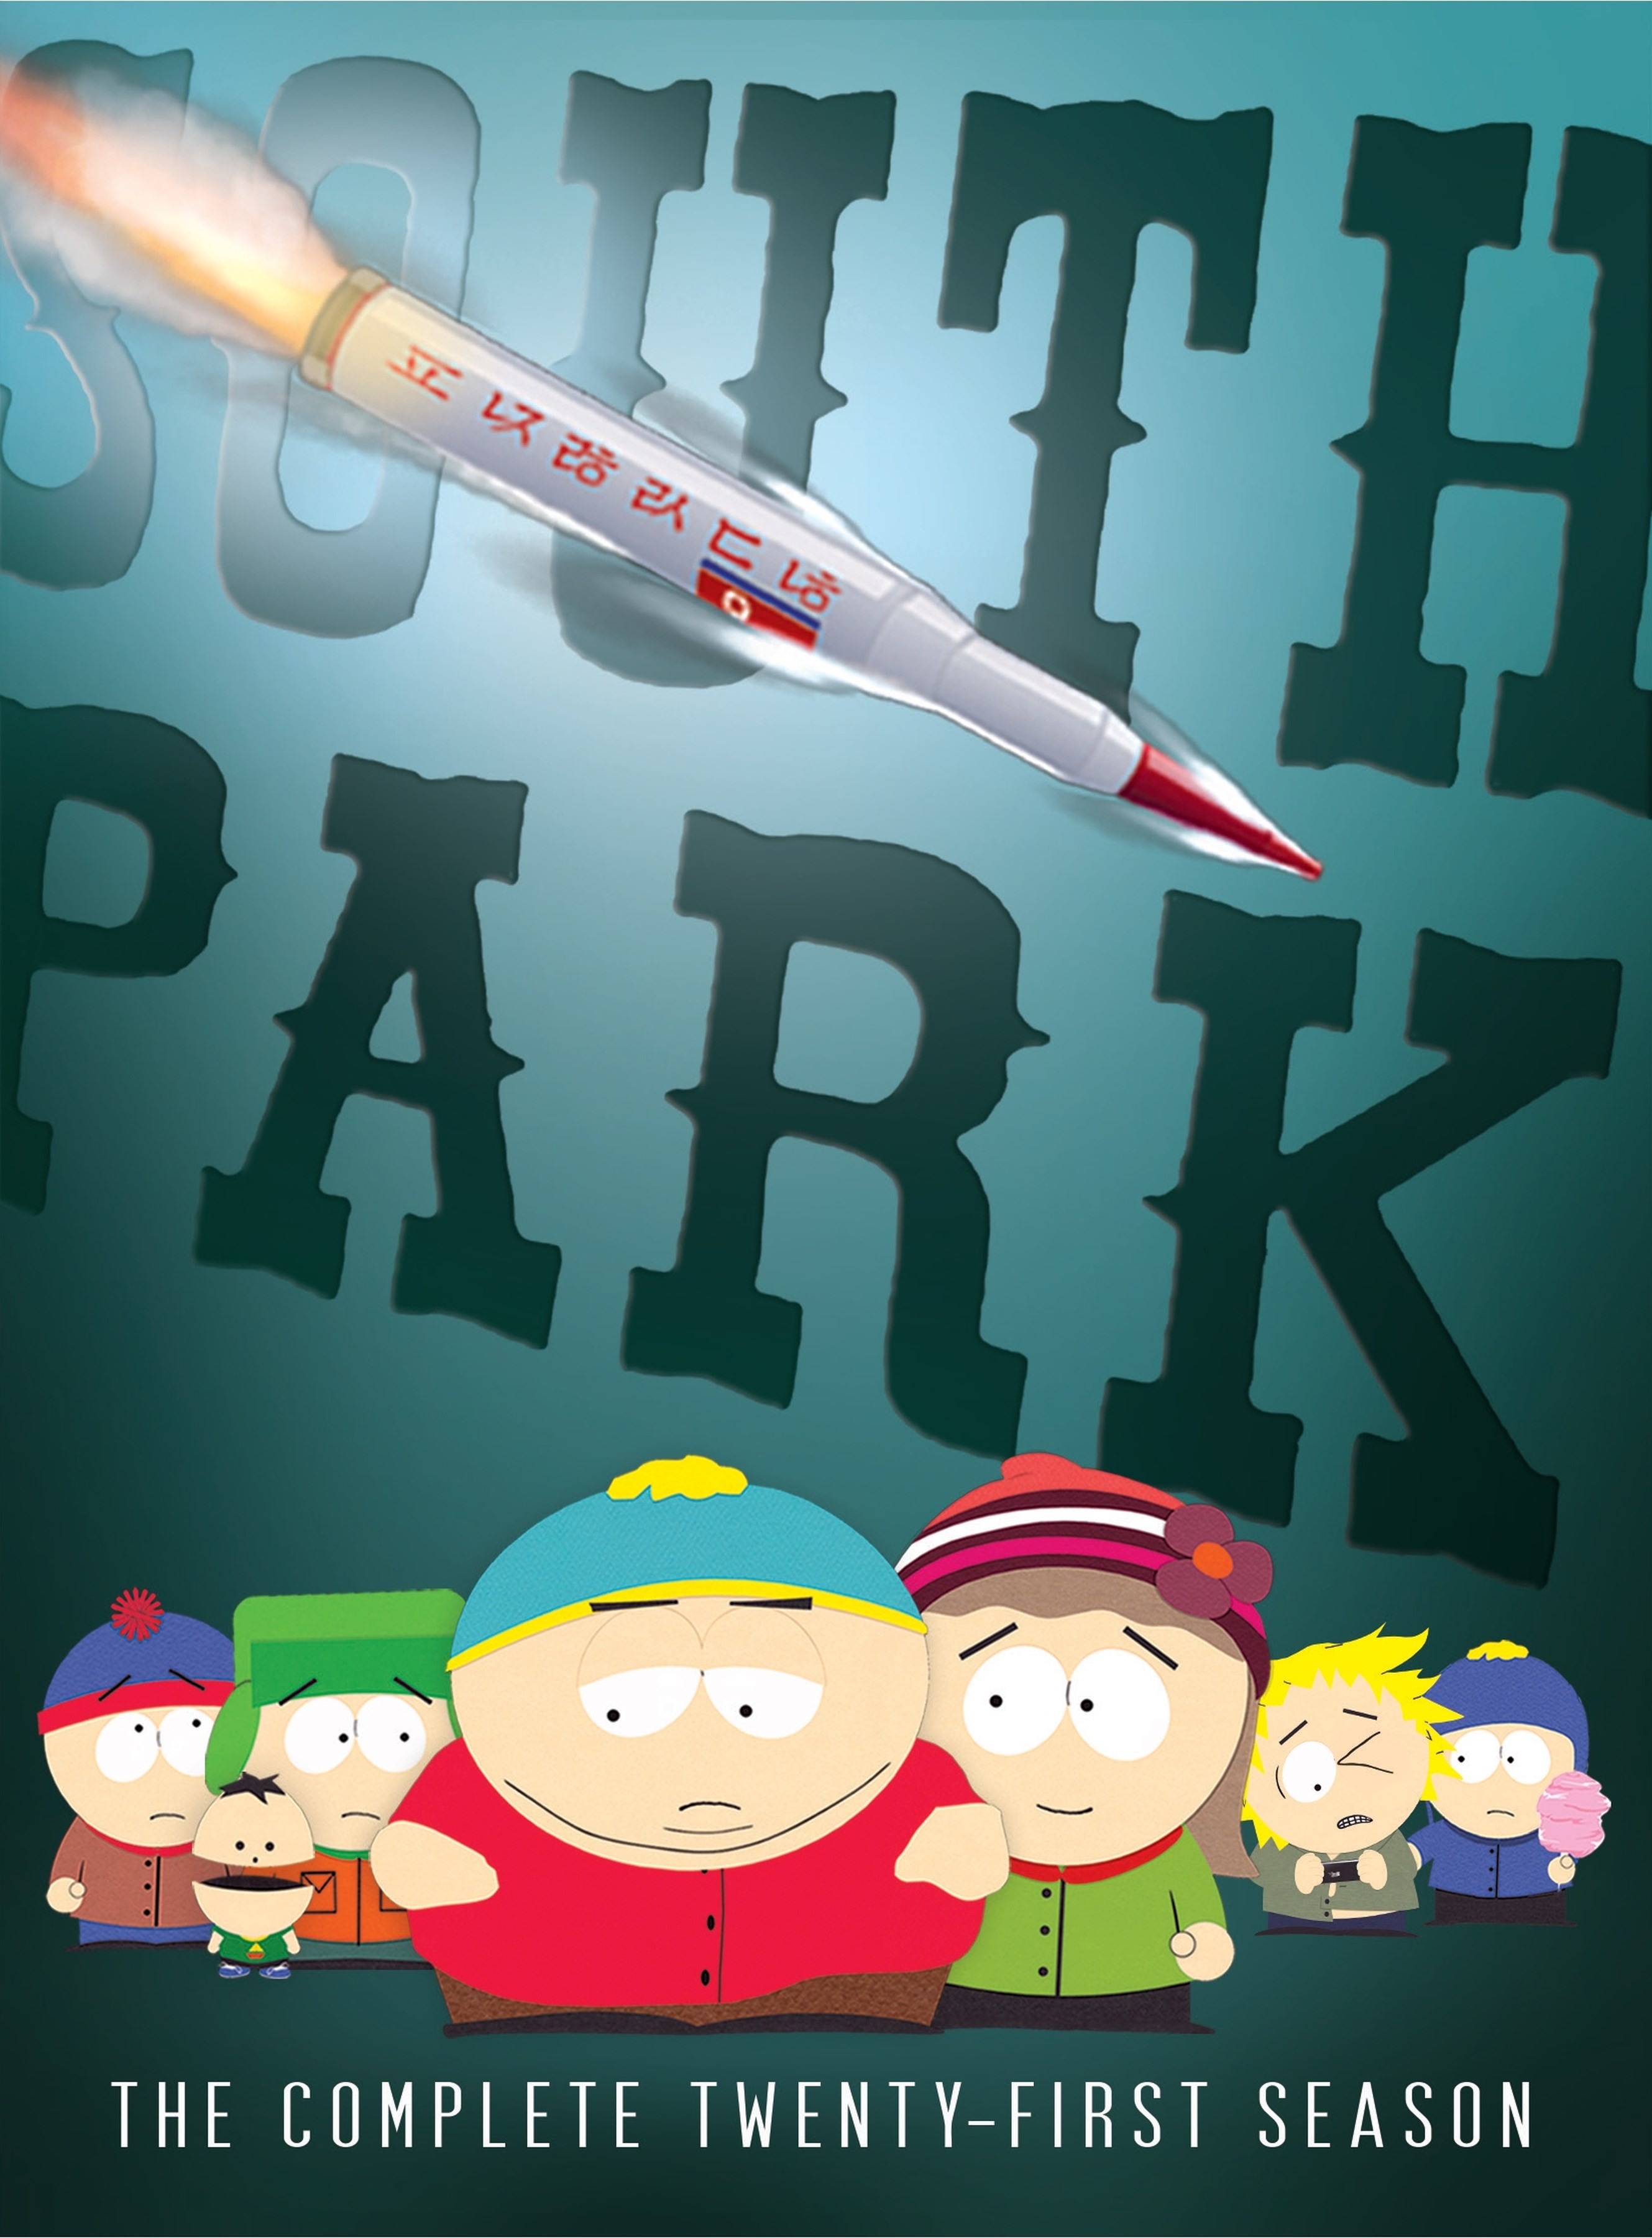 South Park: The Streaming Wars [Blu-ray] - Best Buy